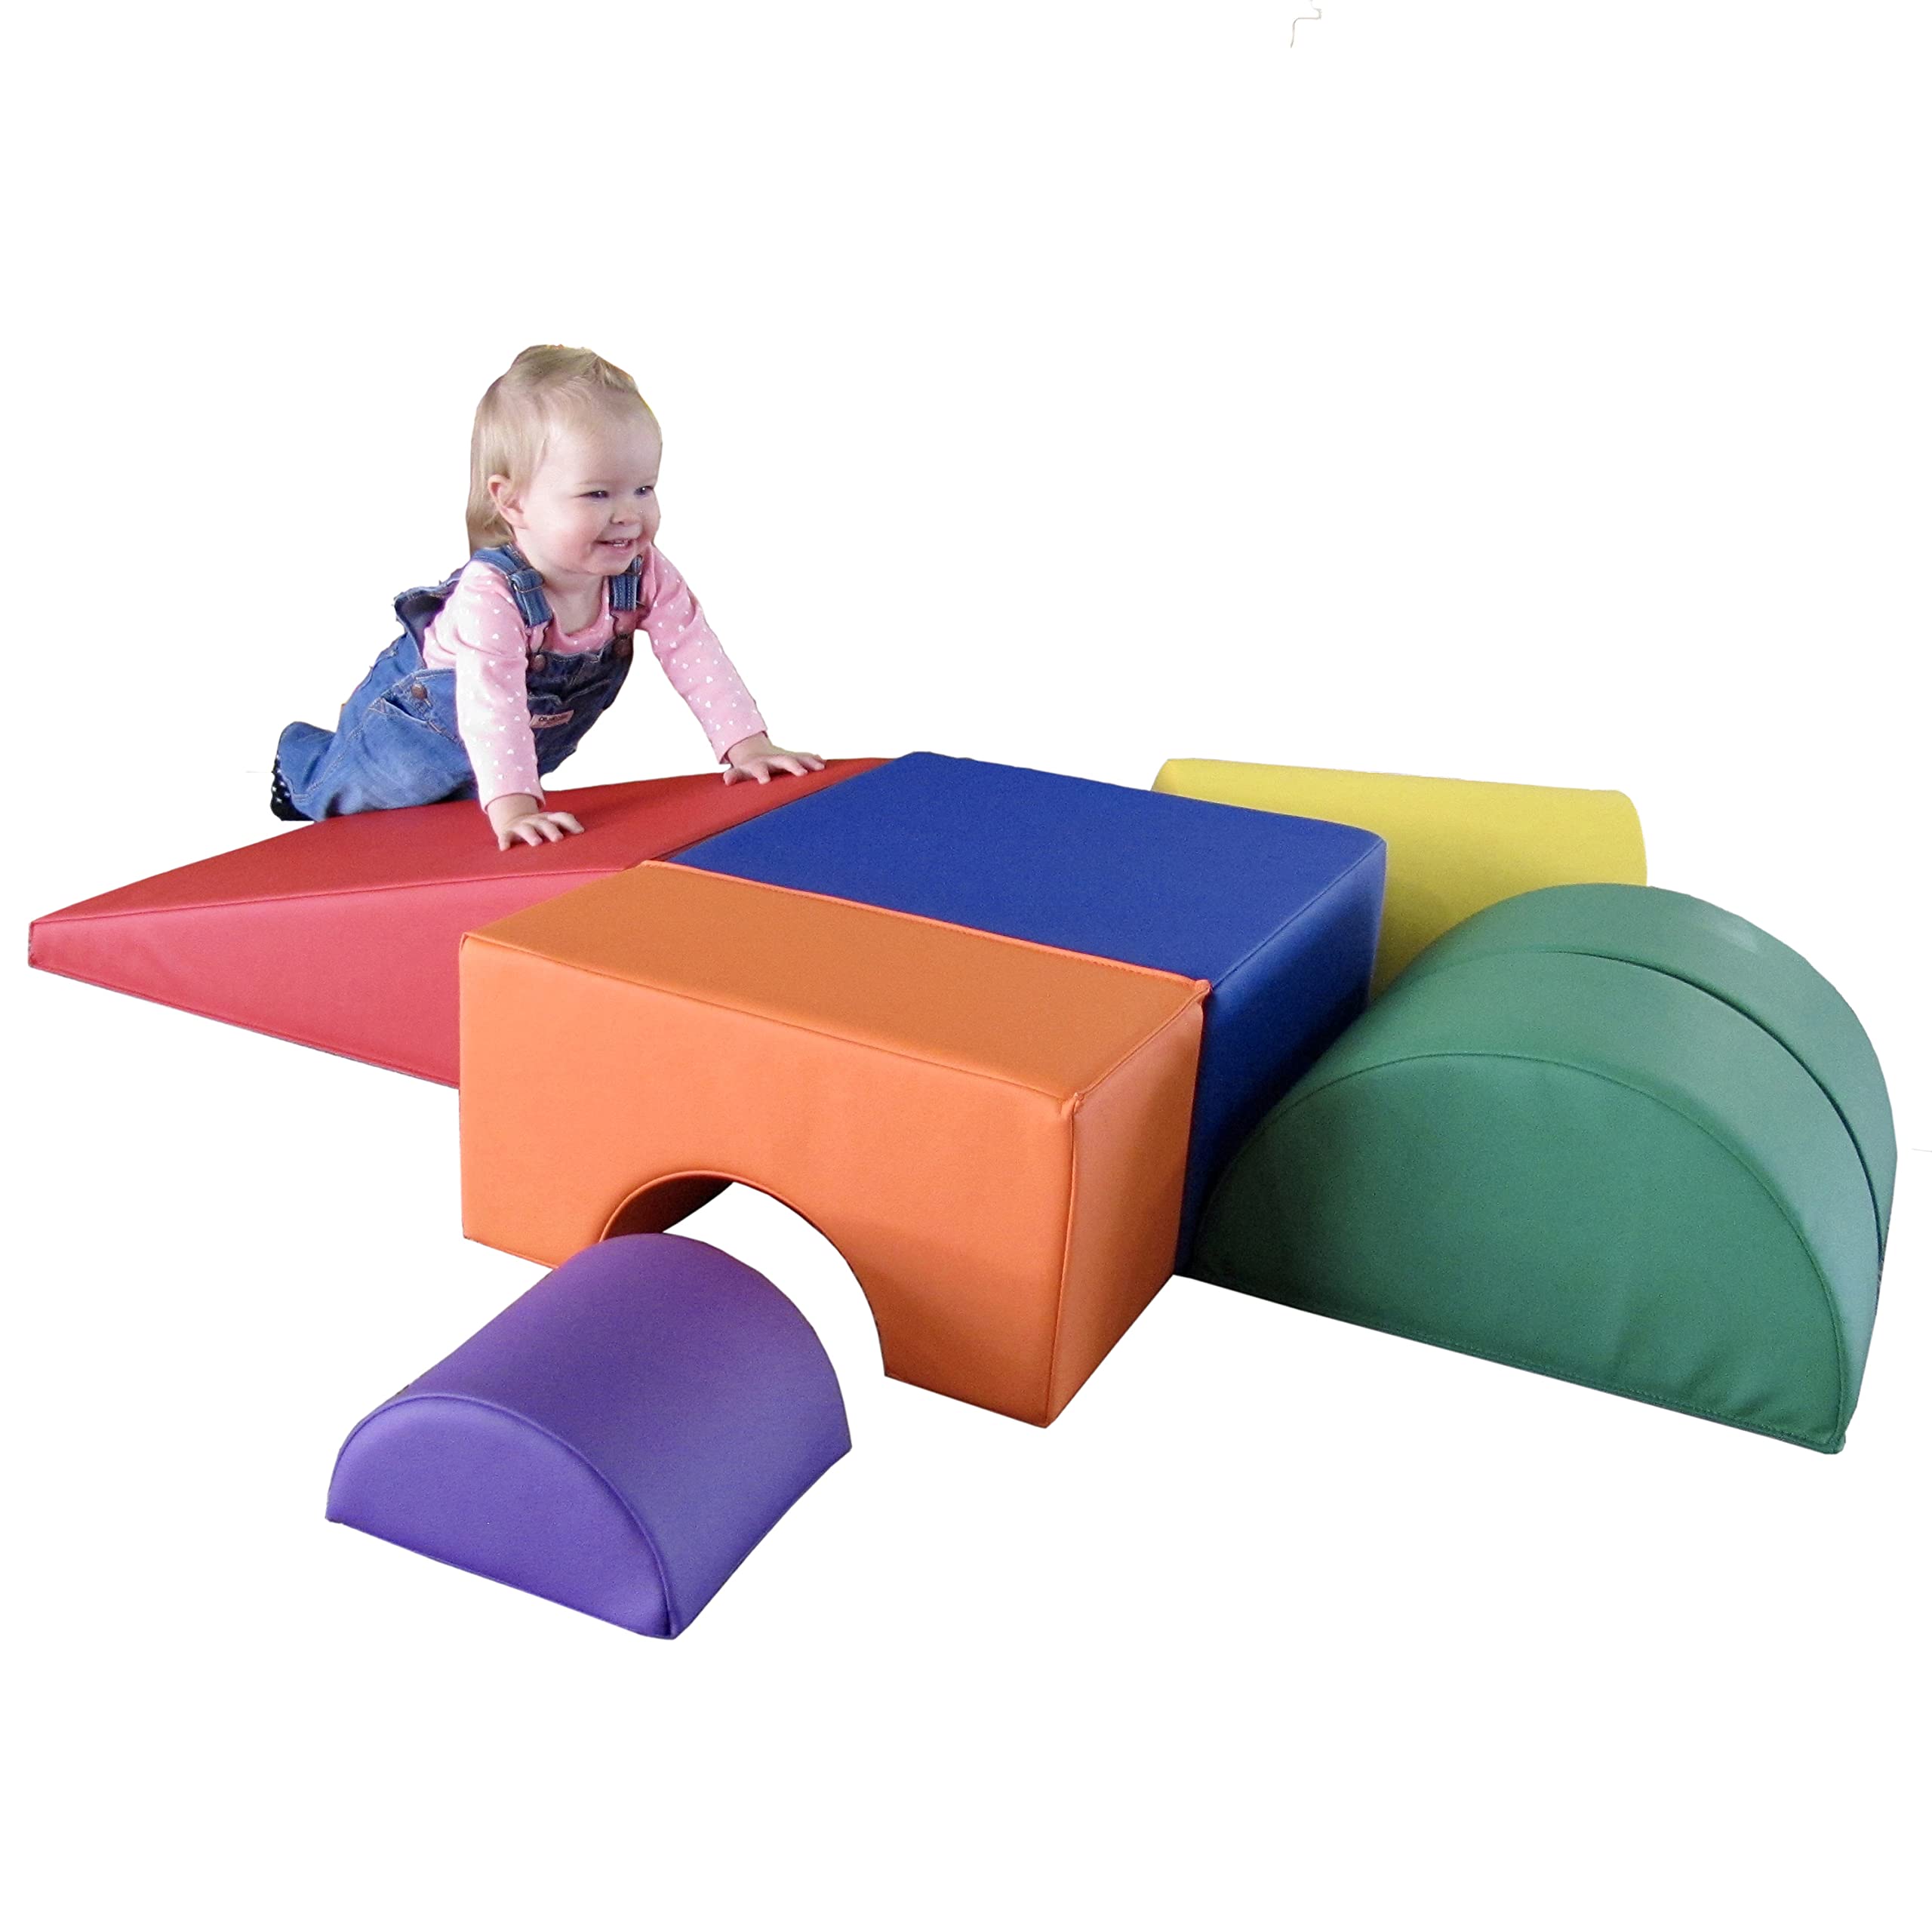 Factory Direct Partners FDP SoftScape Playtime and Climb Multipurpose Soft Foam Playset with Foldable Seat for Infants and Toddlers; Crawling, Climbing, Block Play for Home, Daycare,